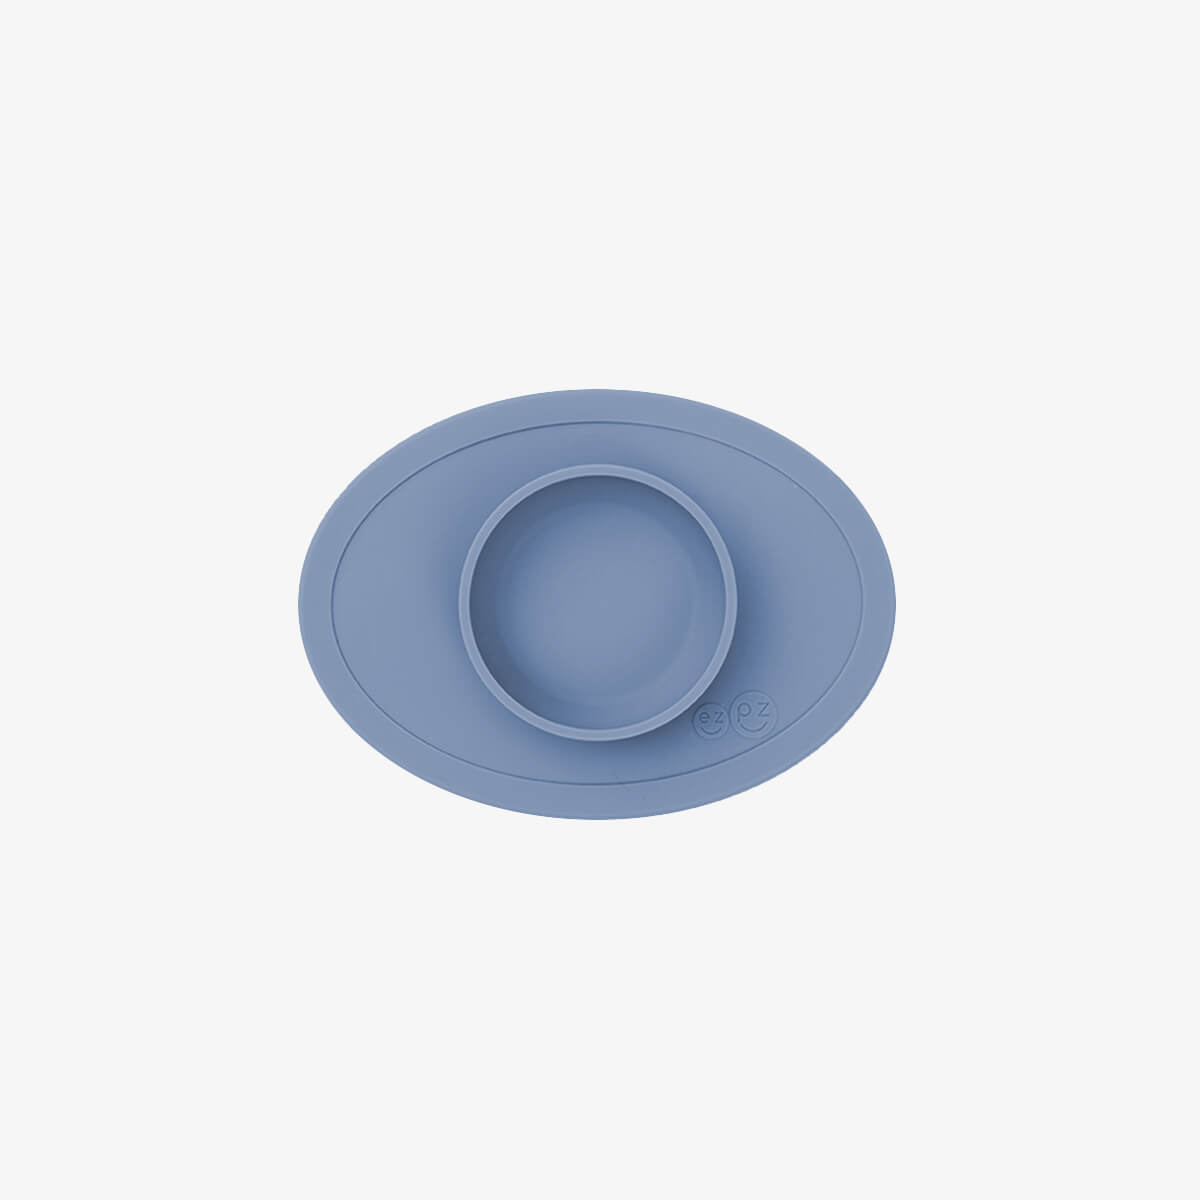 The Tiny Bowl in Indigo Blue by ezpz / Silicone Bowl for Babies that Fits on High Chairs